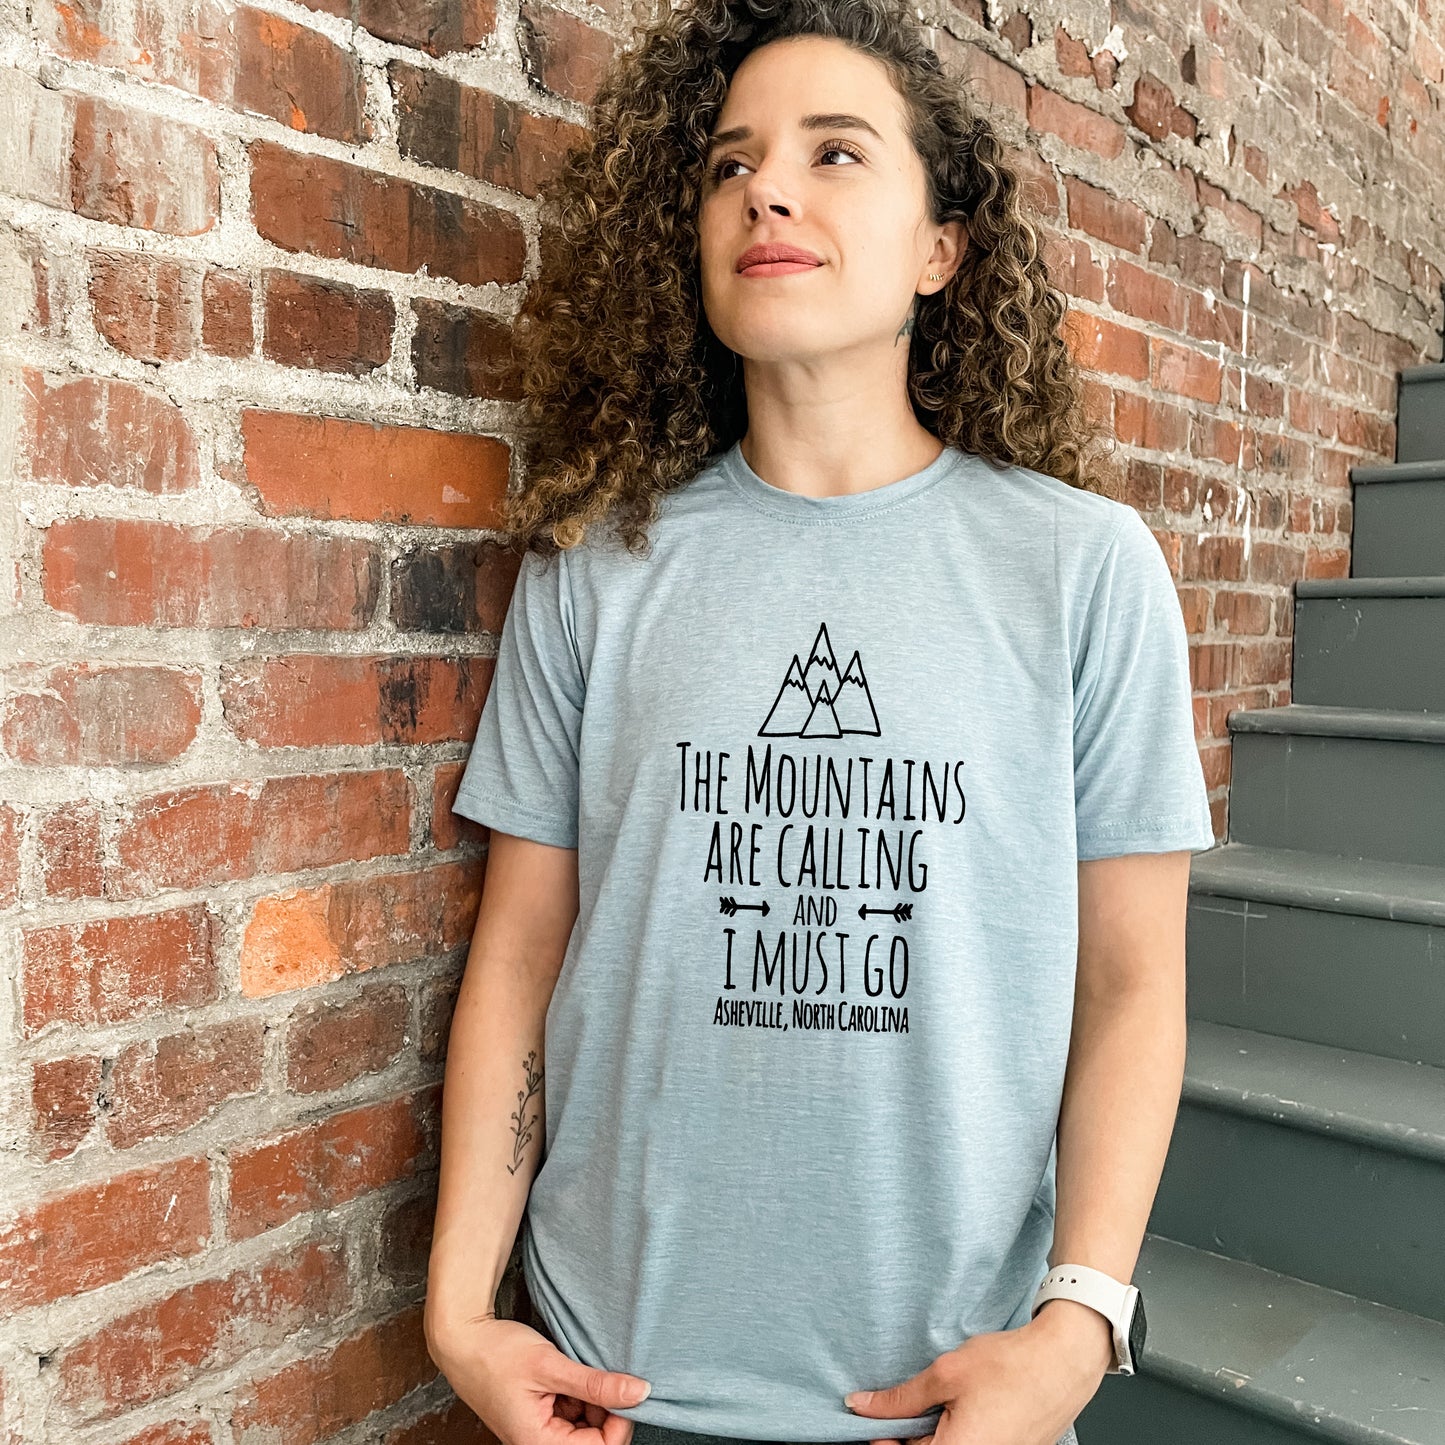 The Mountains Are Calling And I Must Go, Asheville North Carolina - Men's / Unisex Tee - Stonewash Blue or Sage